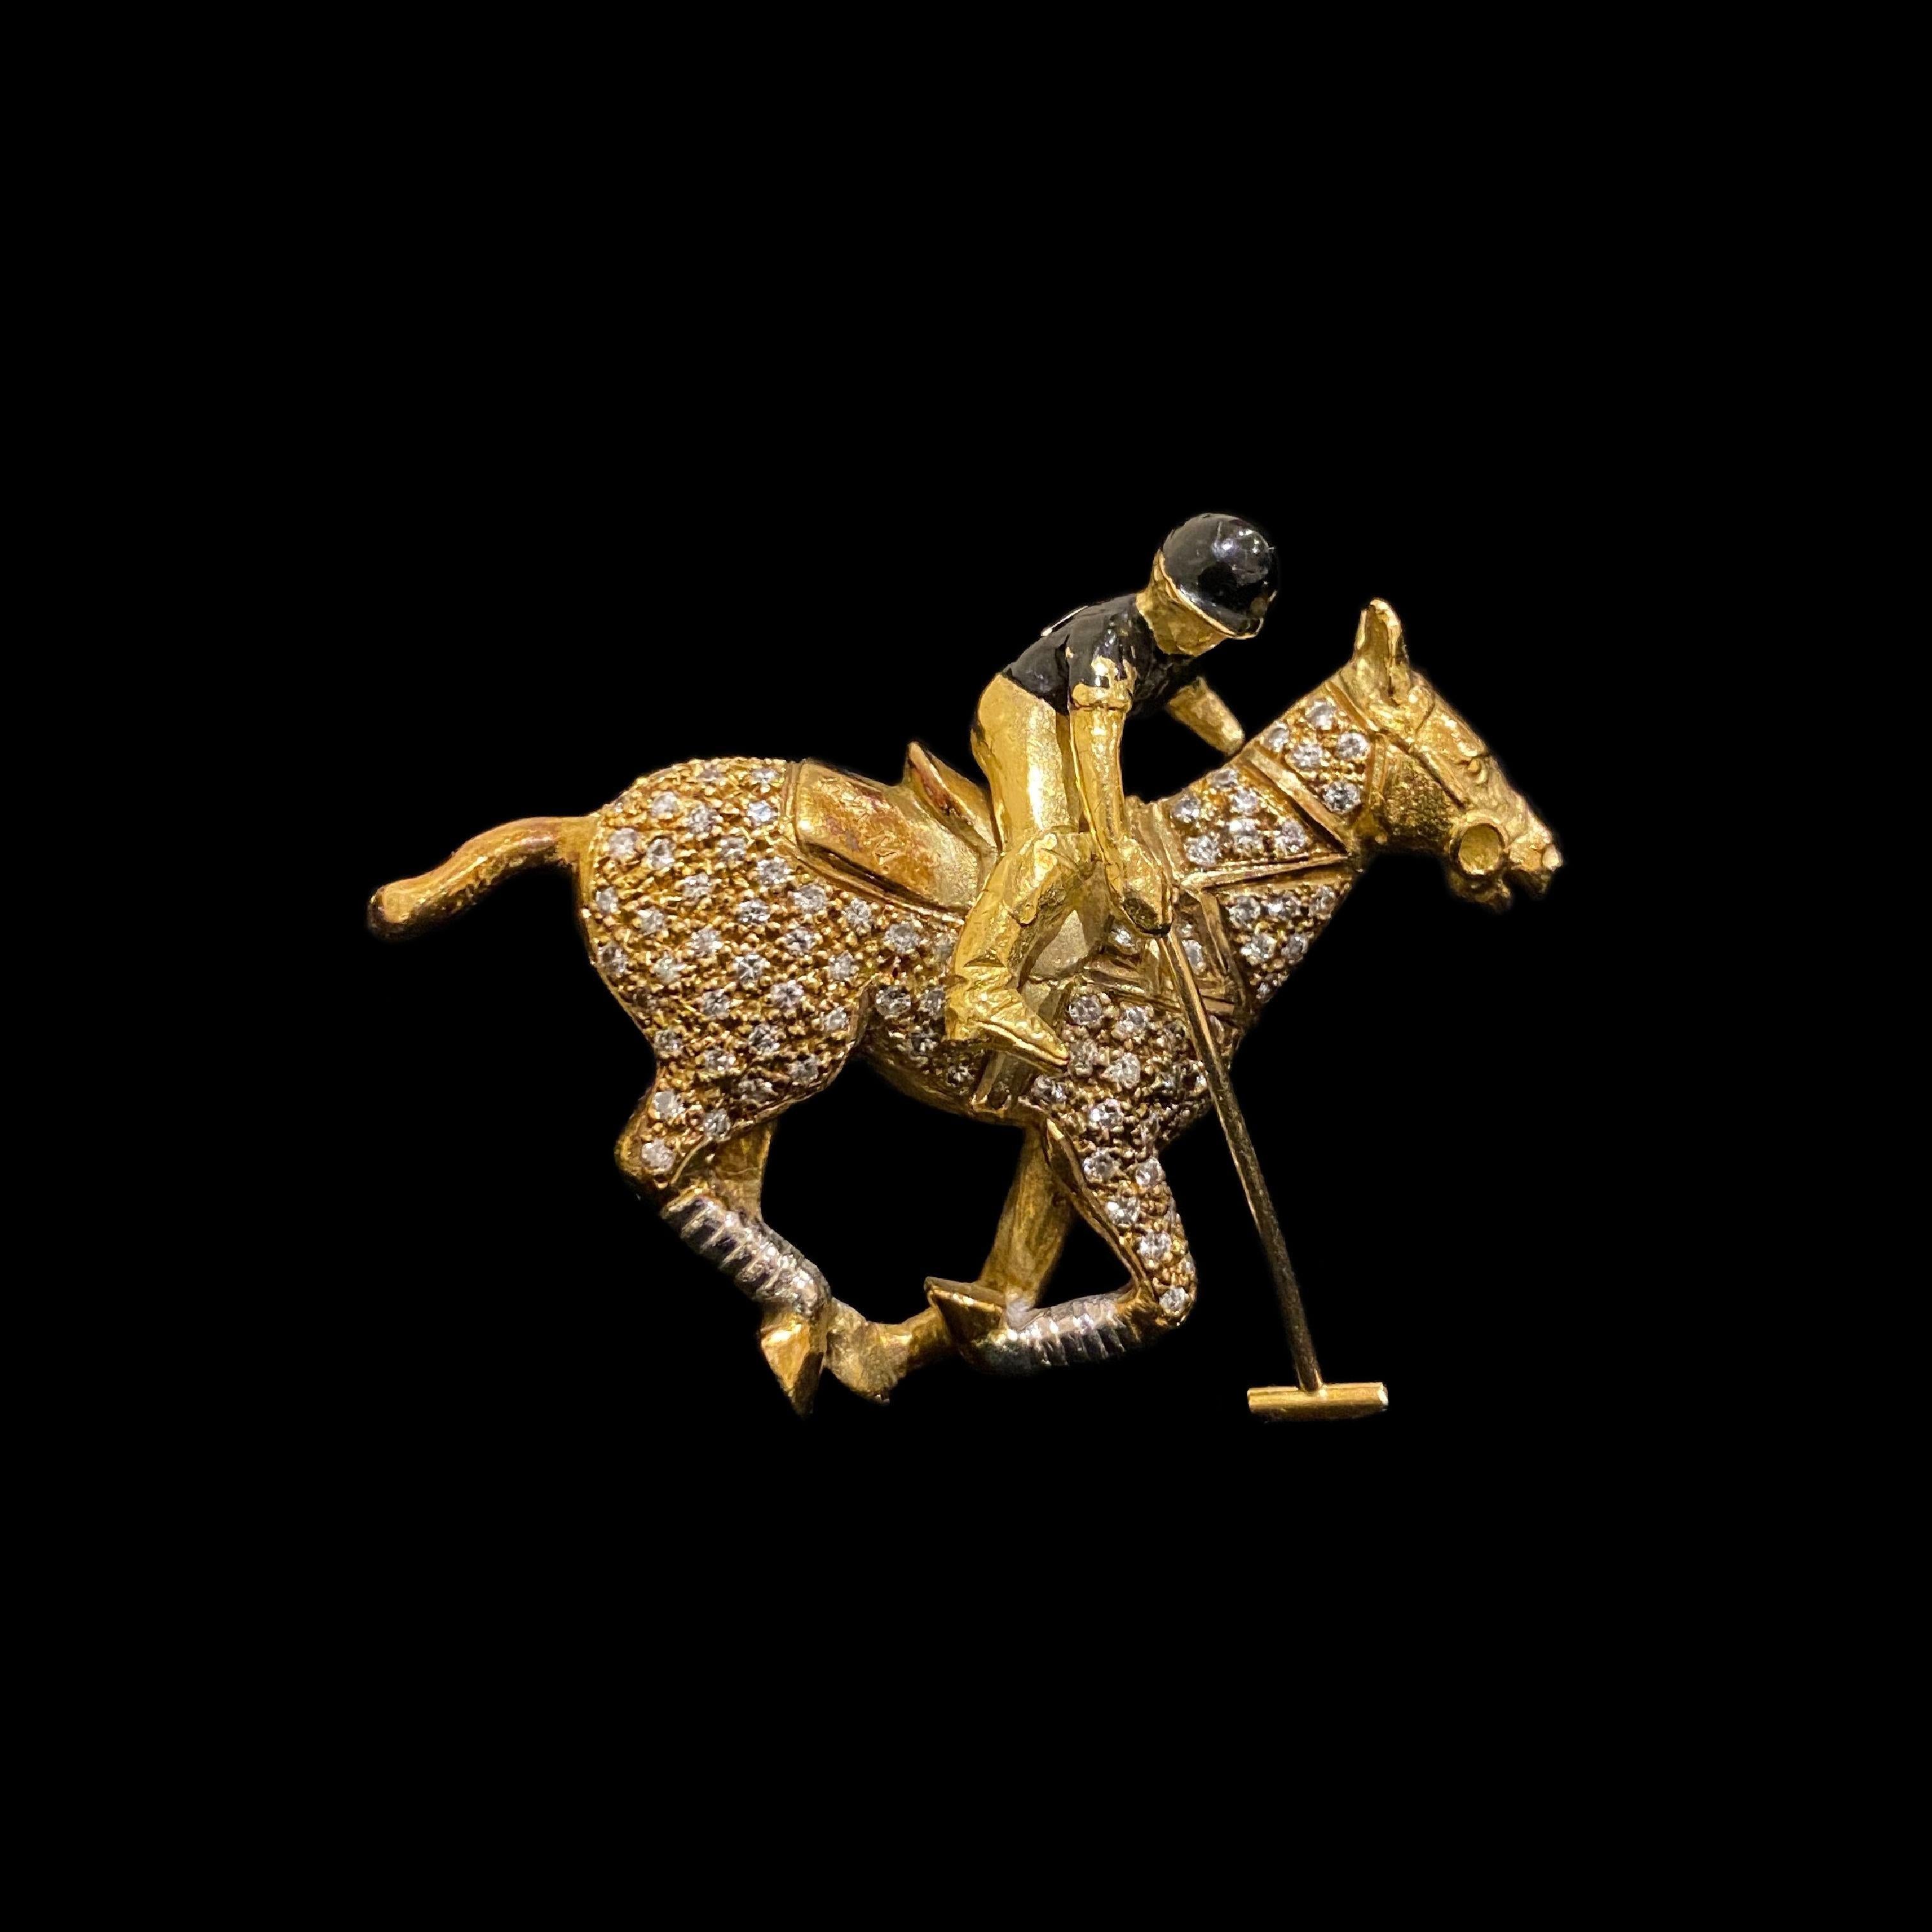 Theo Fennell 1980s Diamond and Enamel Articulated Polo Player on Pony Horse Brooch in 18 Karat Yellow Gold. Great on and off the pitch!

Designed as a polo pony and articulated player, the pony’s body is pavé-set throughout with round brilliant-cut